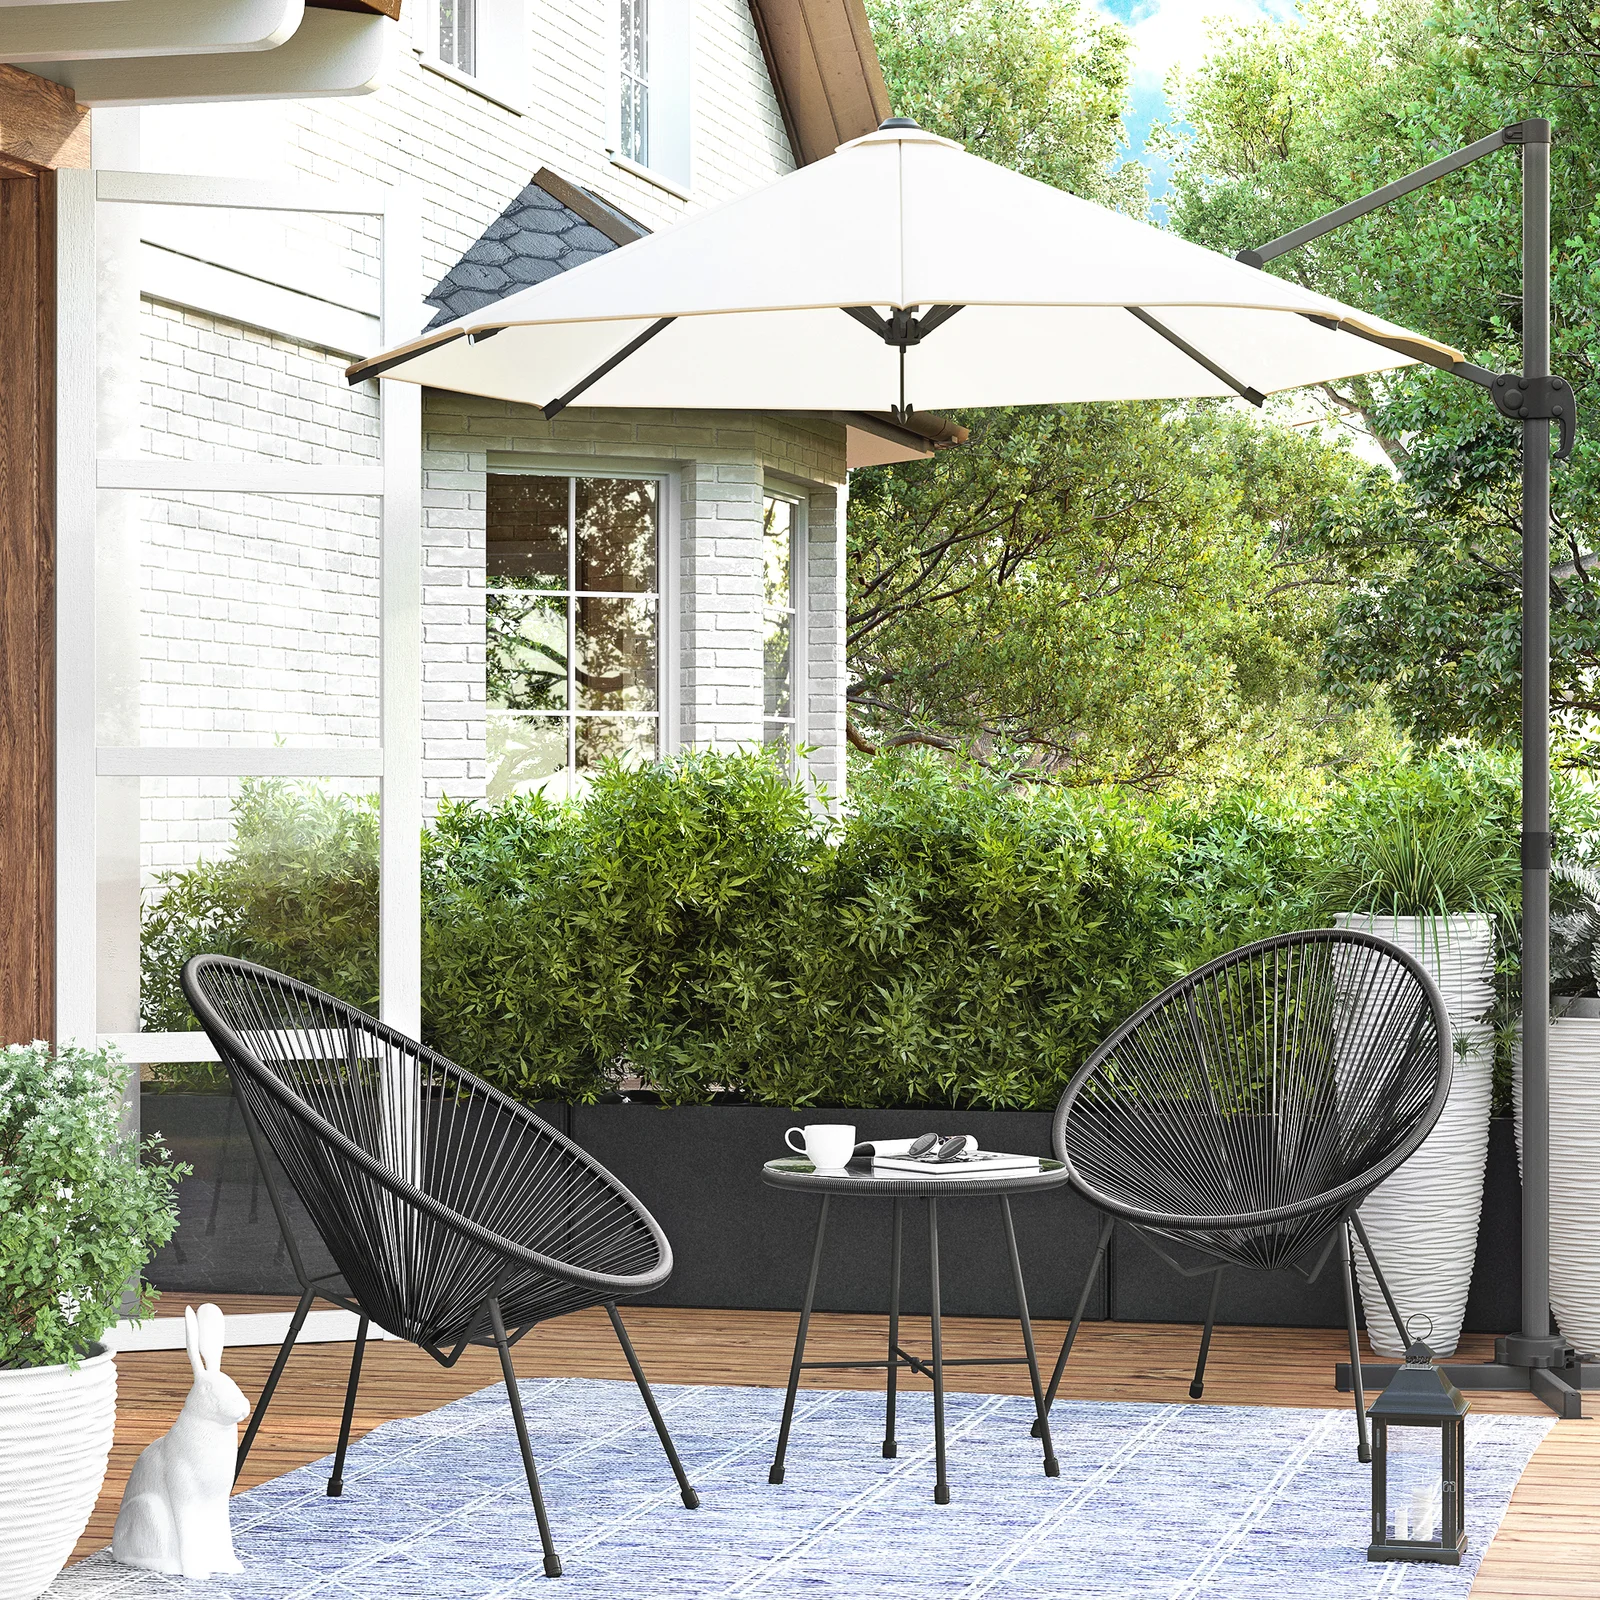 Millions Outdoor Patio Seating Set 2 Chairs and 1 Table Set (Black)